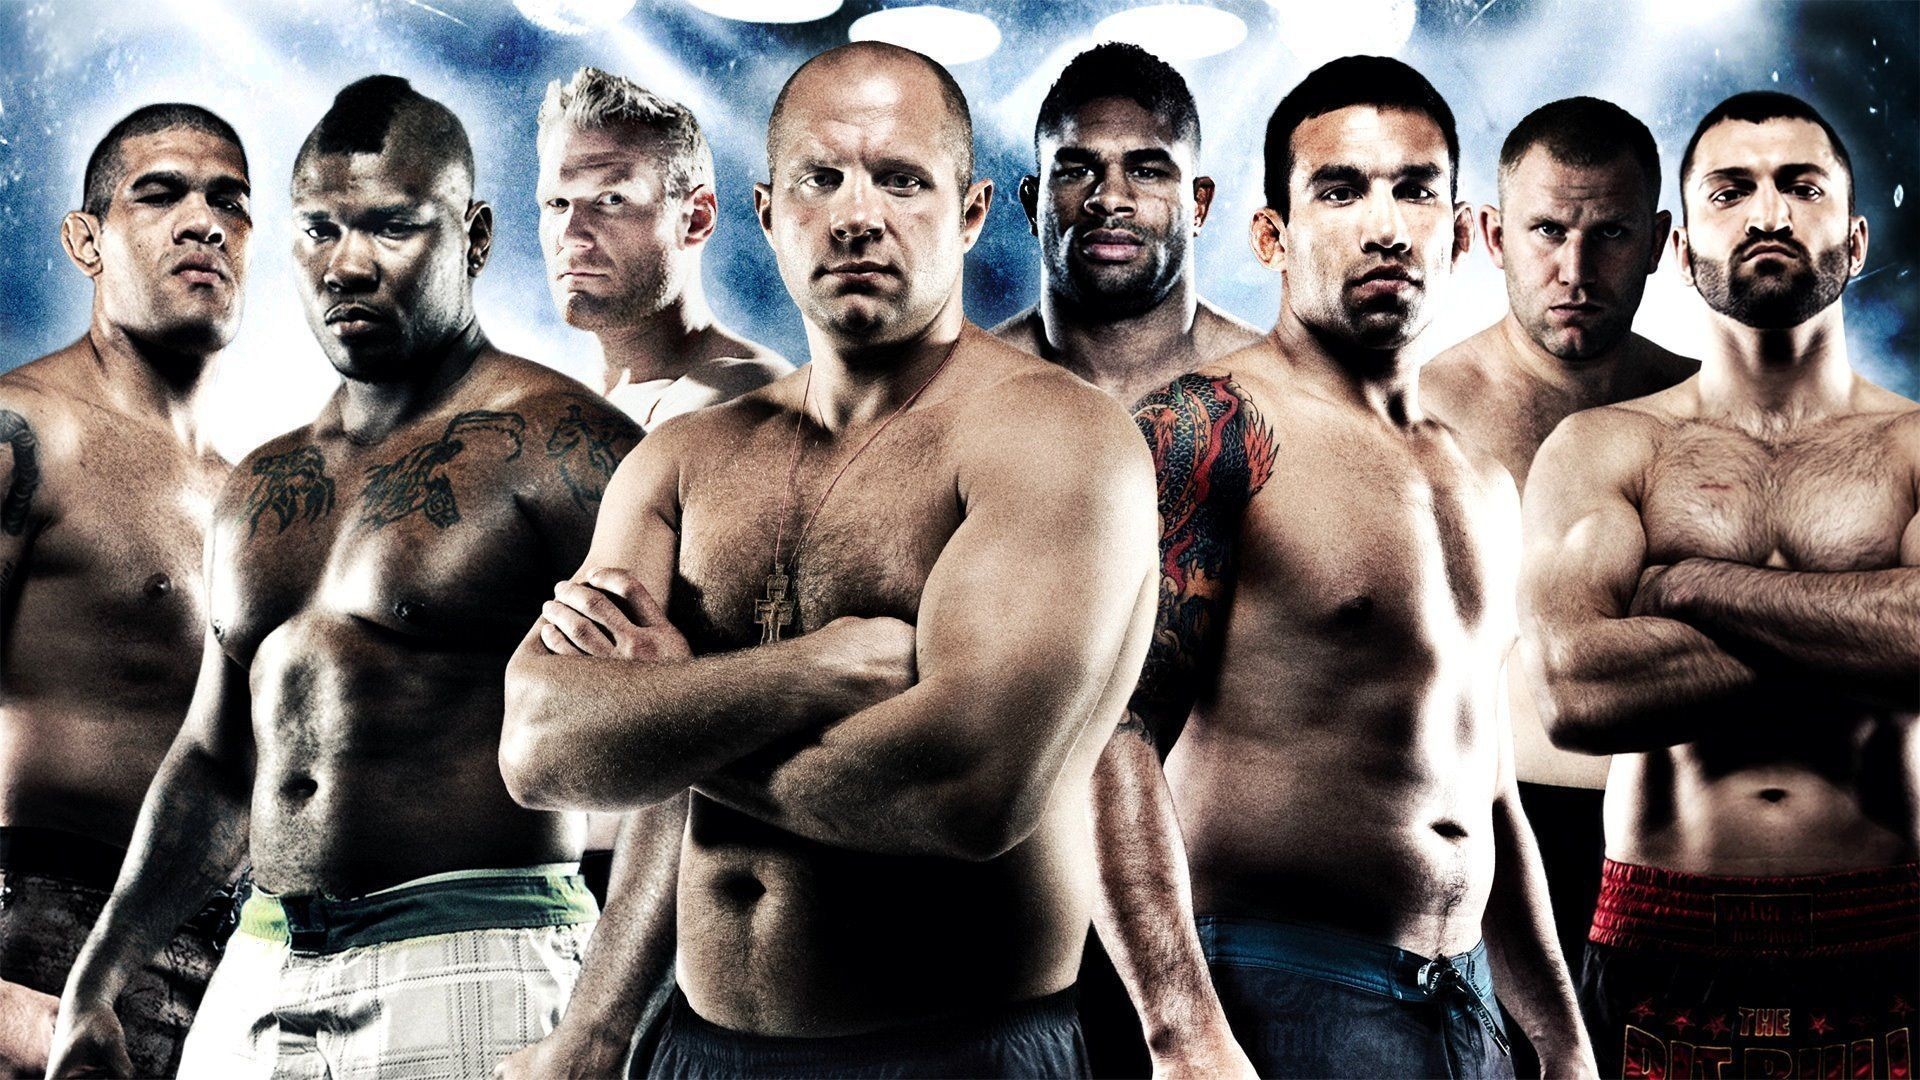 Ufc Fighters Wallpaper Image